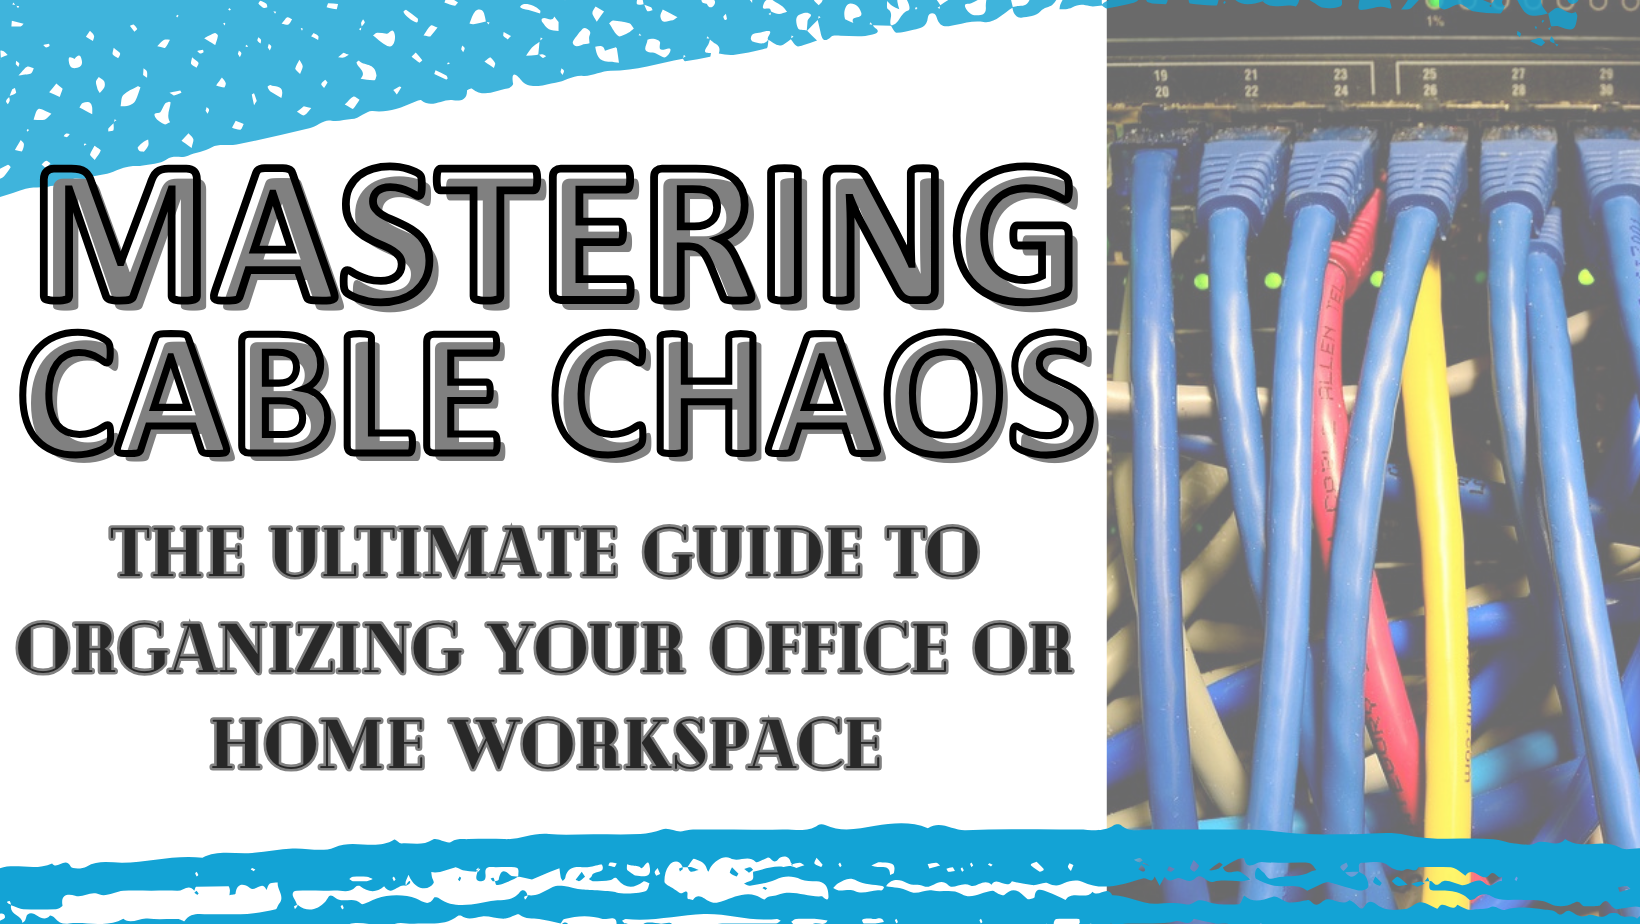 Mastering Cable Chaos: The Ultimate Guide to Organizing Your Office or Home Workspace